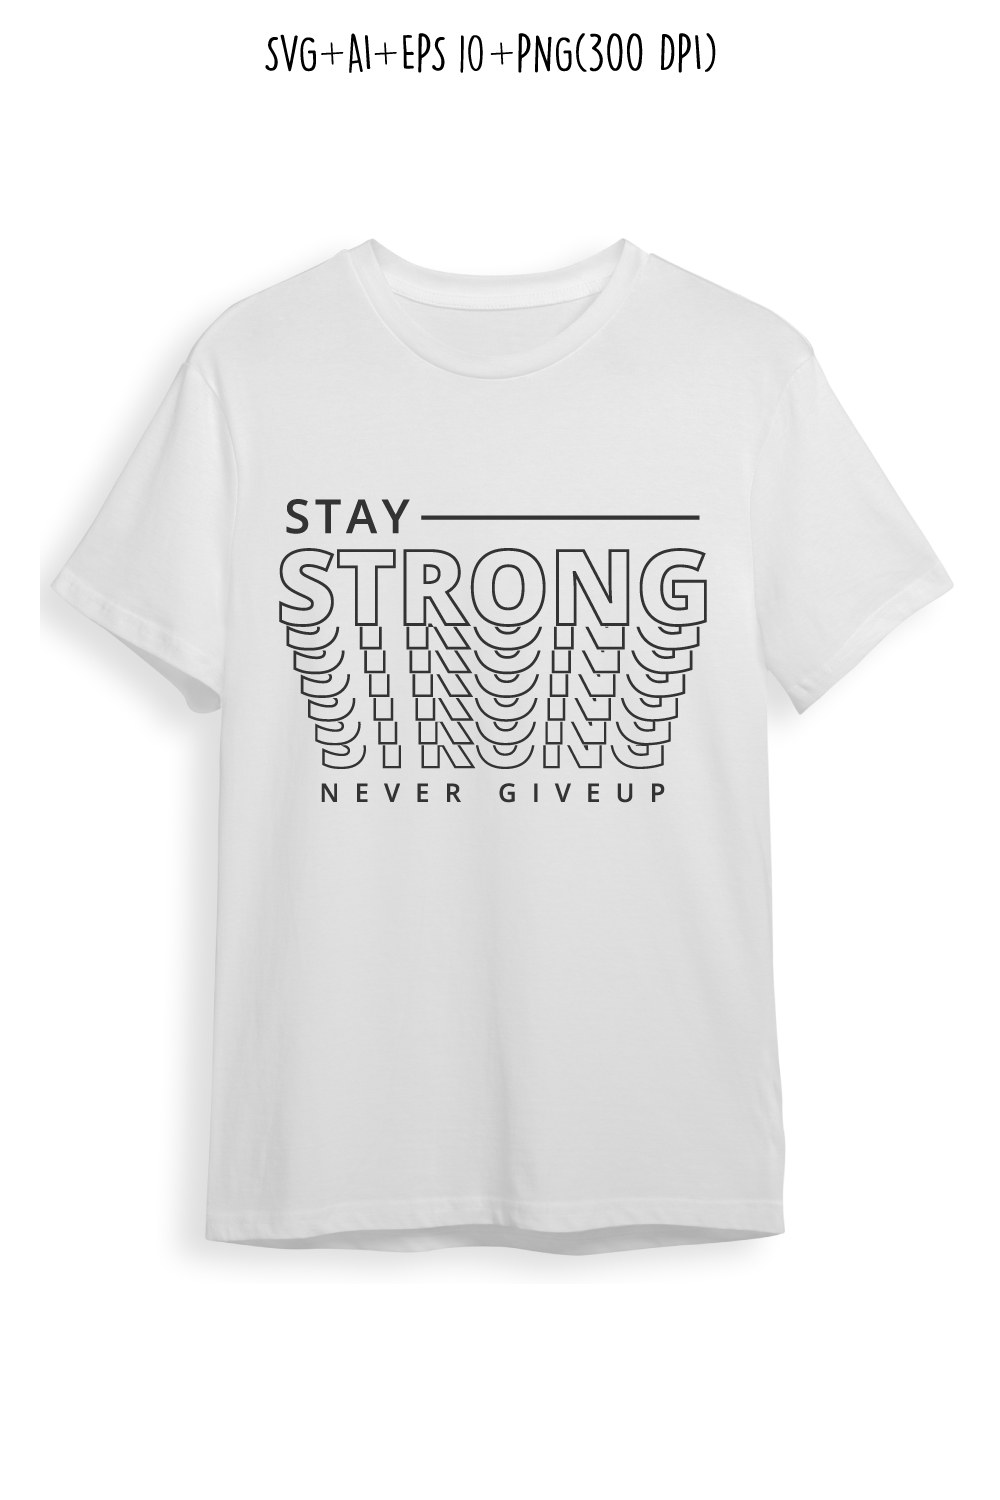 Stay strong never give up motivational quote typography urban style t-shirt design for t-shirts, cards, frame artwork, phone cases, bags, mugs, stickers, tumblers, print, etc pinterest preview image.